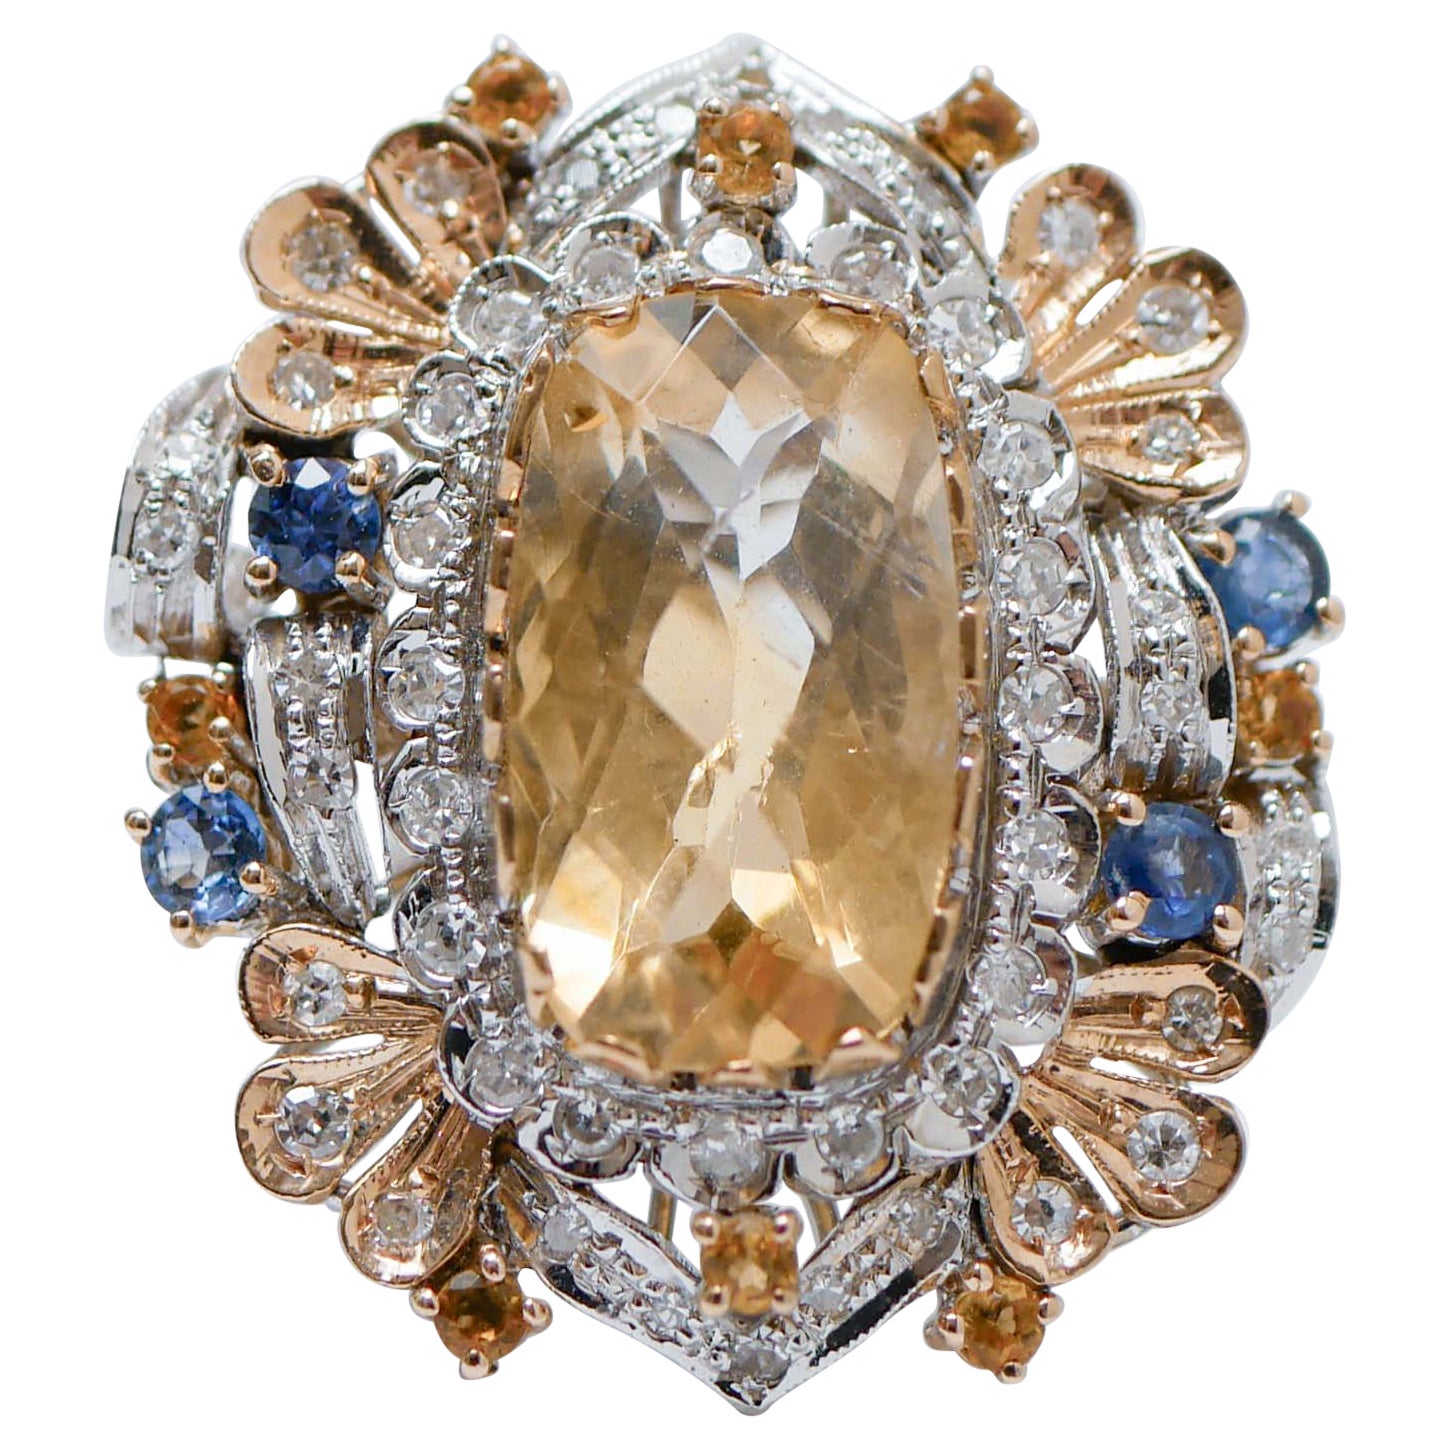 Topaz, Sapphires, Diamonds, 14 Karat White Gold and Rose Gold Ring. For Sale